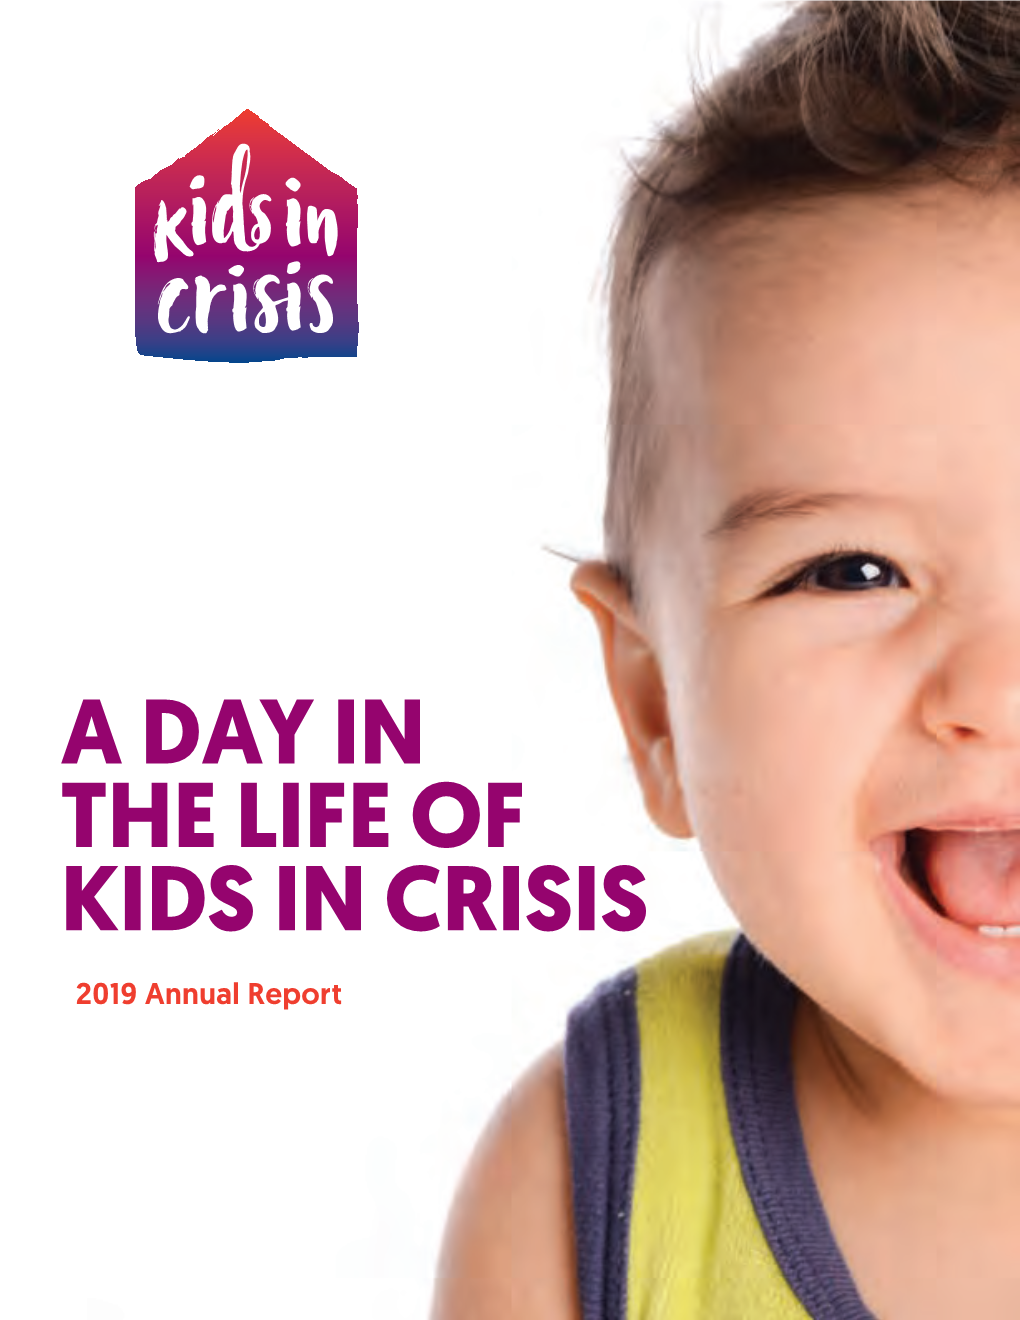 2019 Annual Report KIDS in CRISIS IS a 360-DEGREE LIFELINE for CHILDREN NEWBORN THROUGH 18, and THEIR FAMILIES